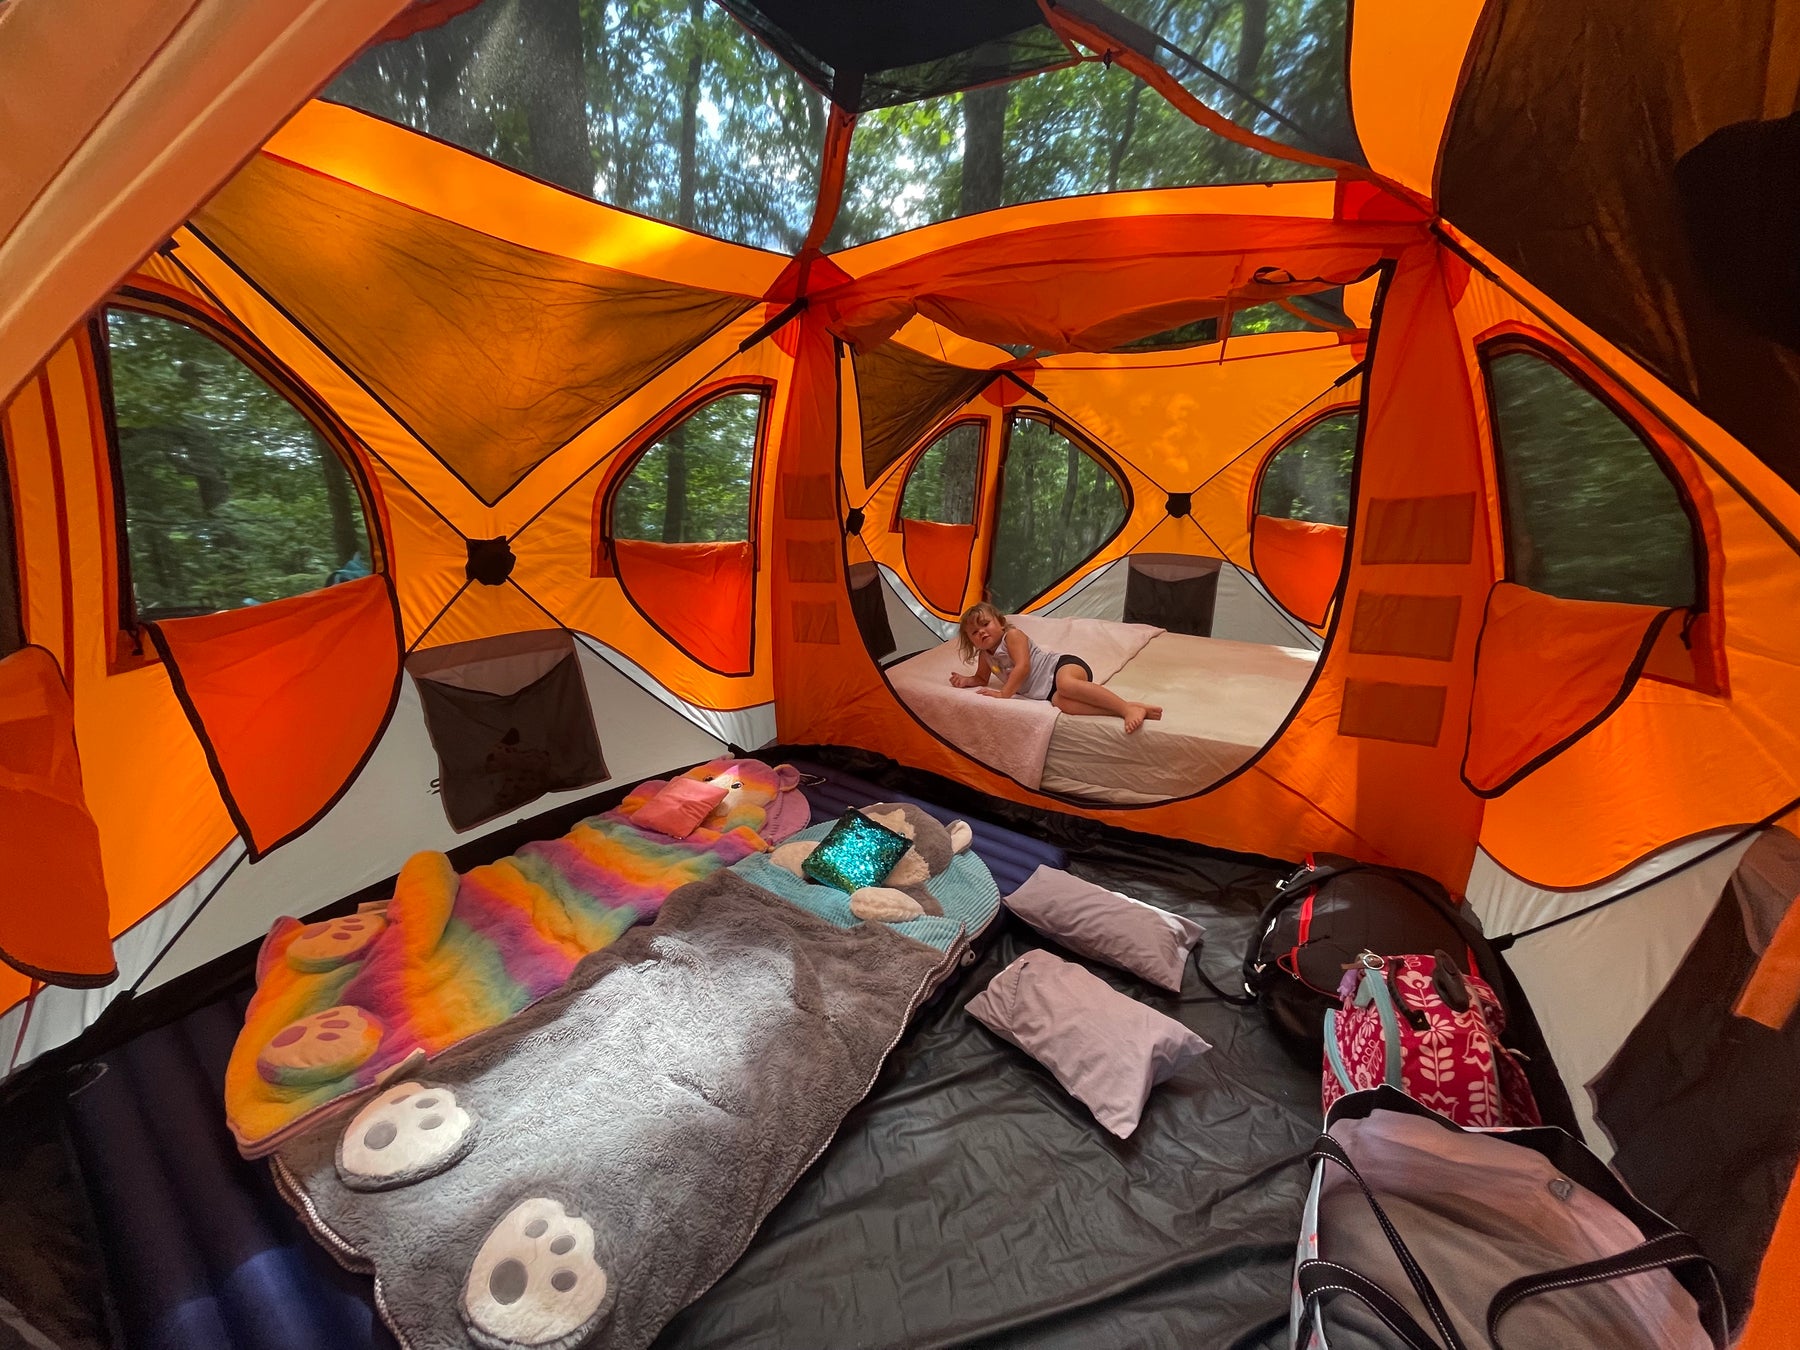 How To: Camping With Kids